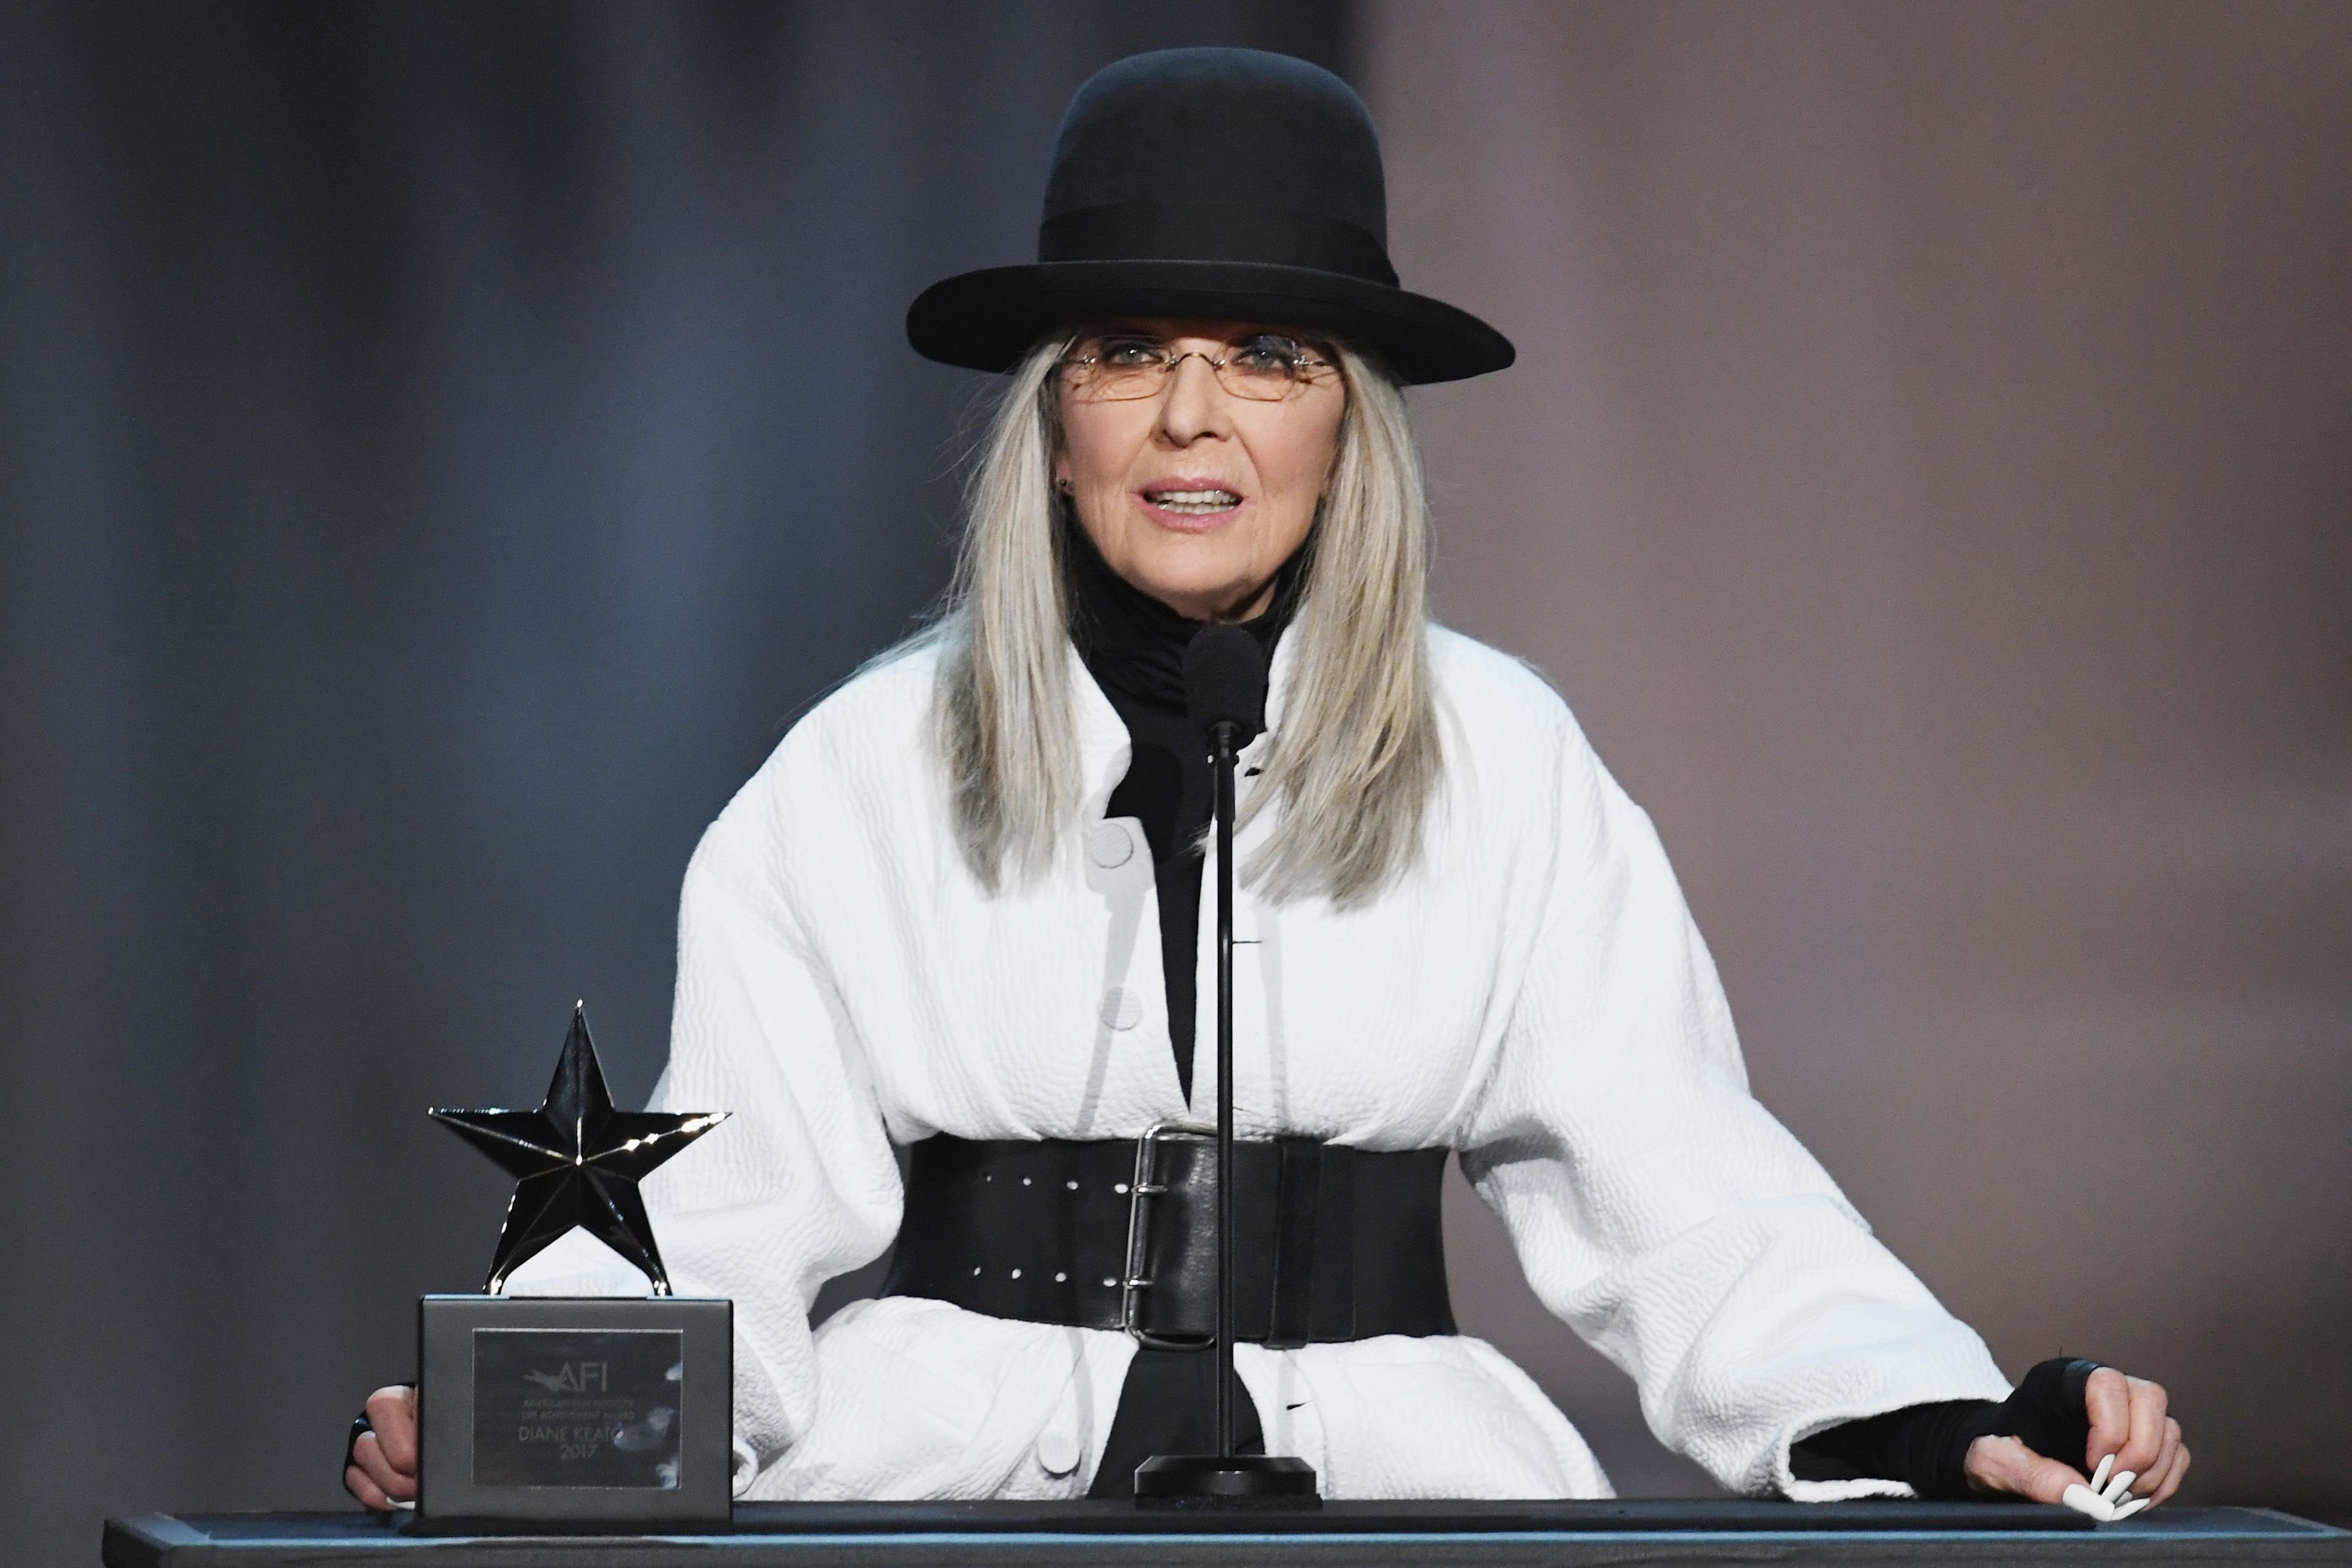 Diane Keaton at the American Film Institute's 45th Life Achievement Award Gala Tribute to her on June 8, 2017, in Hollywood, California. | Source: Kevin Winter/Getty Images